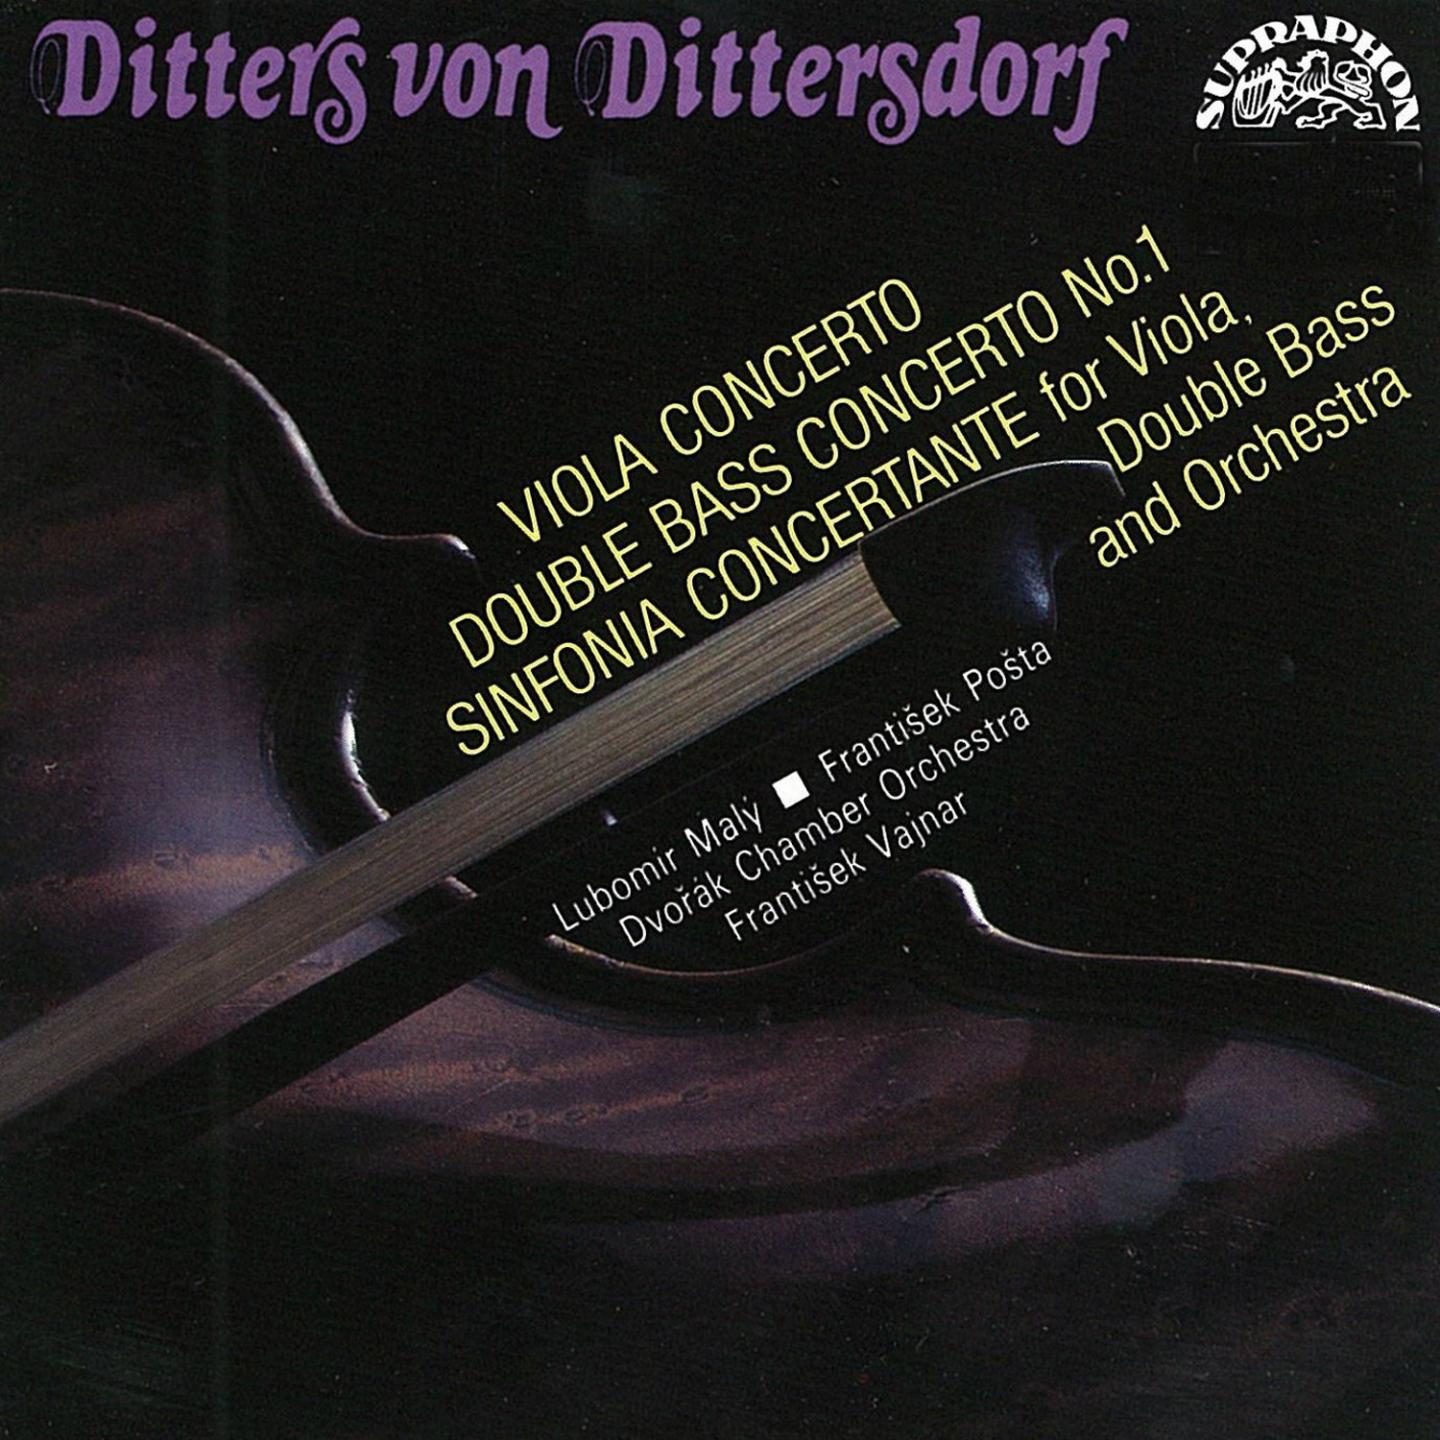 Sinfonia Concertante for Viola, Double Bass and Orchestra: II. Andantino